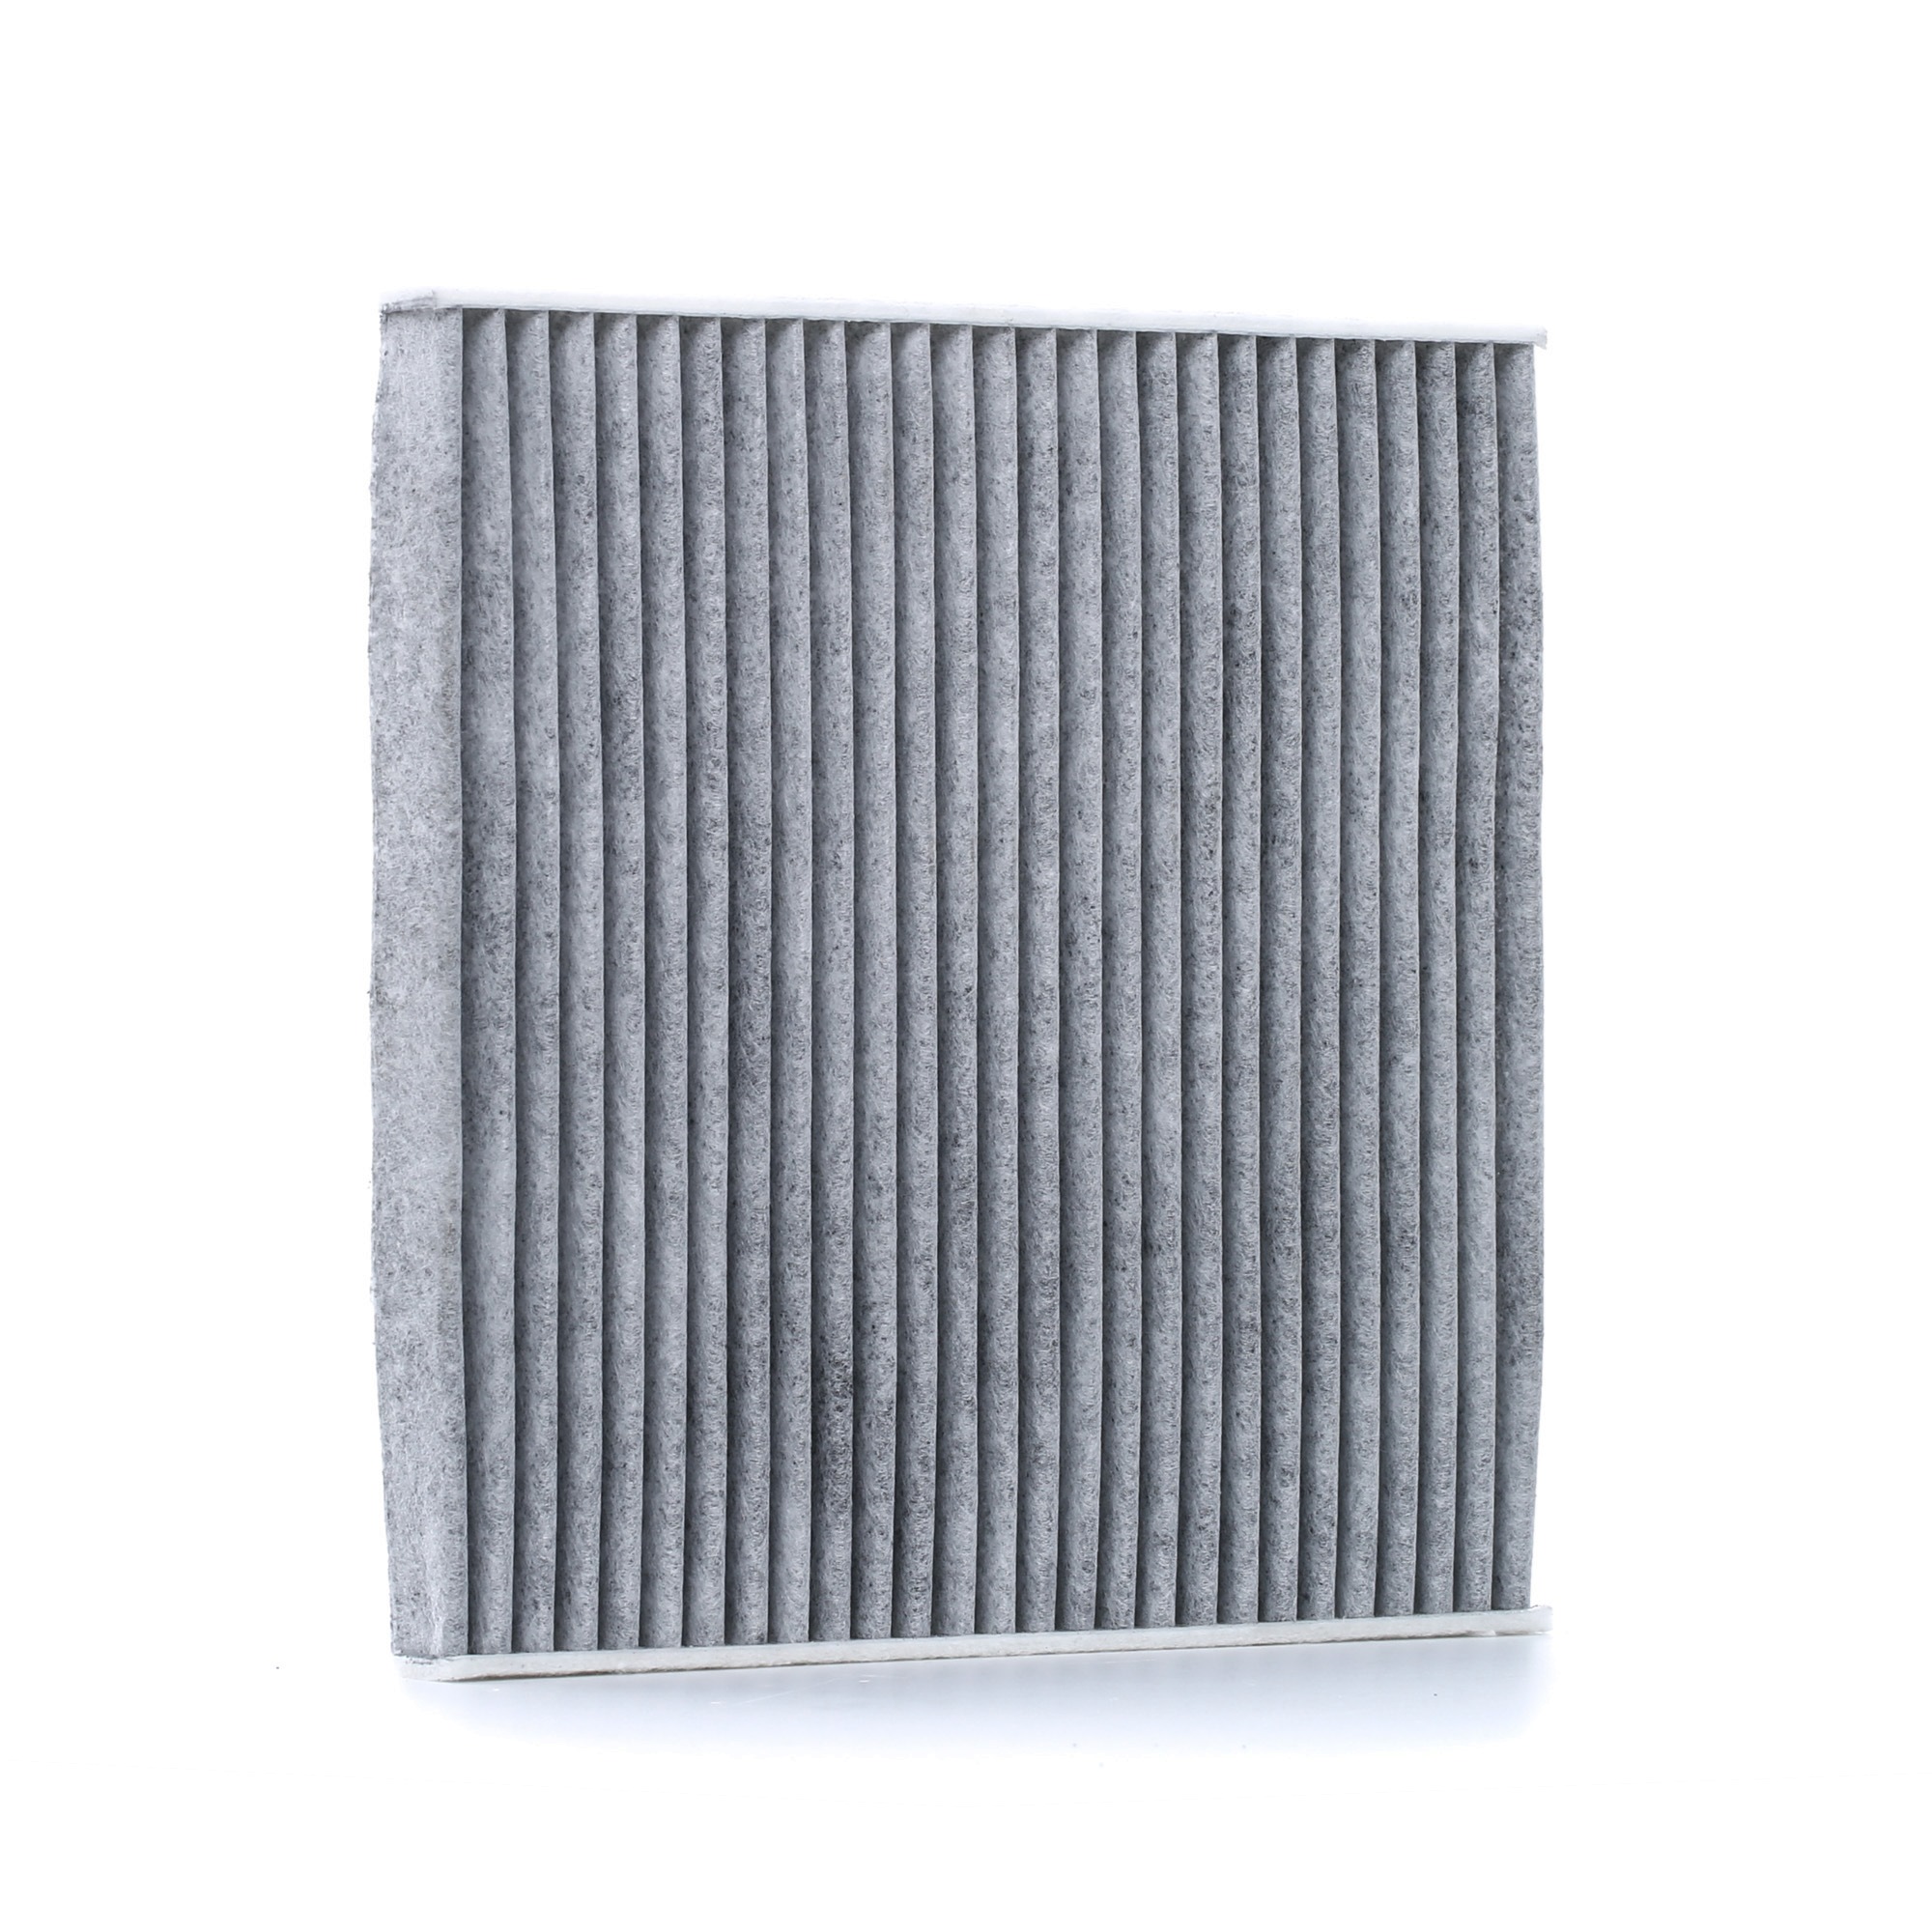 30-12 320 0005 MEYLE Pollen filter TOYOTA Activated Carbon Filter, Filter Insert, with Odour Absorbent Effect, 215 mm x 214 mm x 19 mm, ORIGINAL Quality